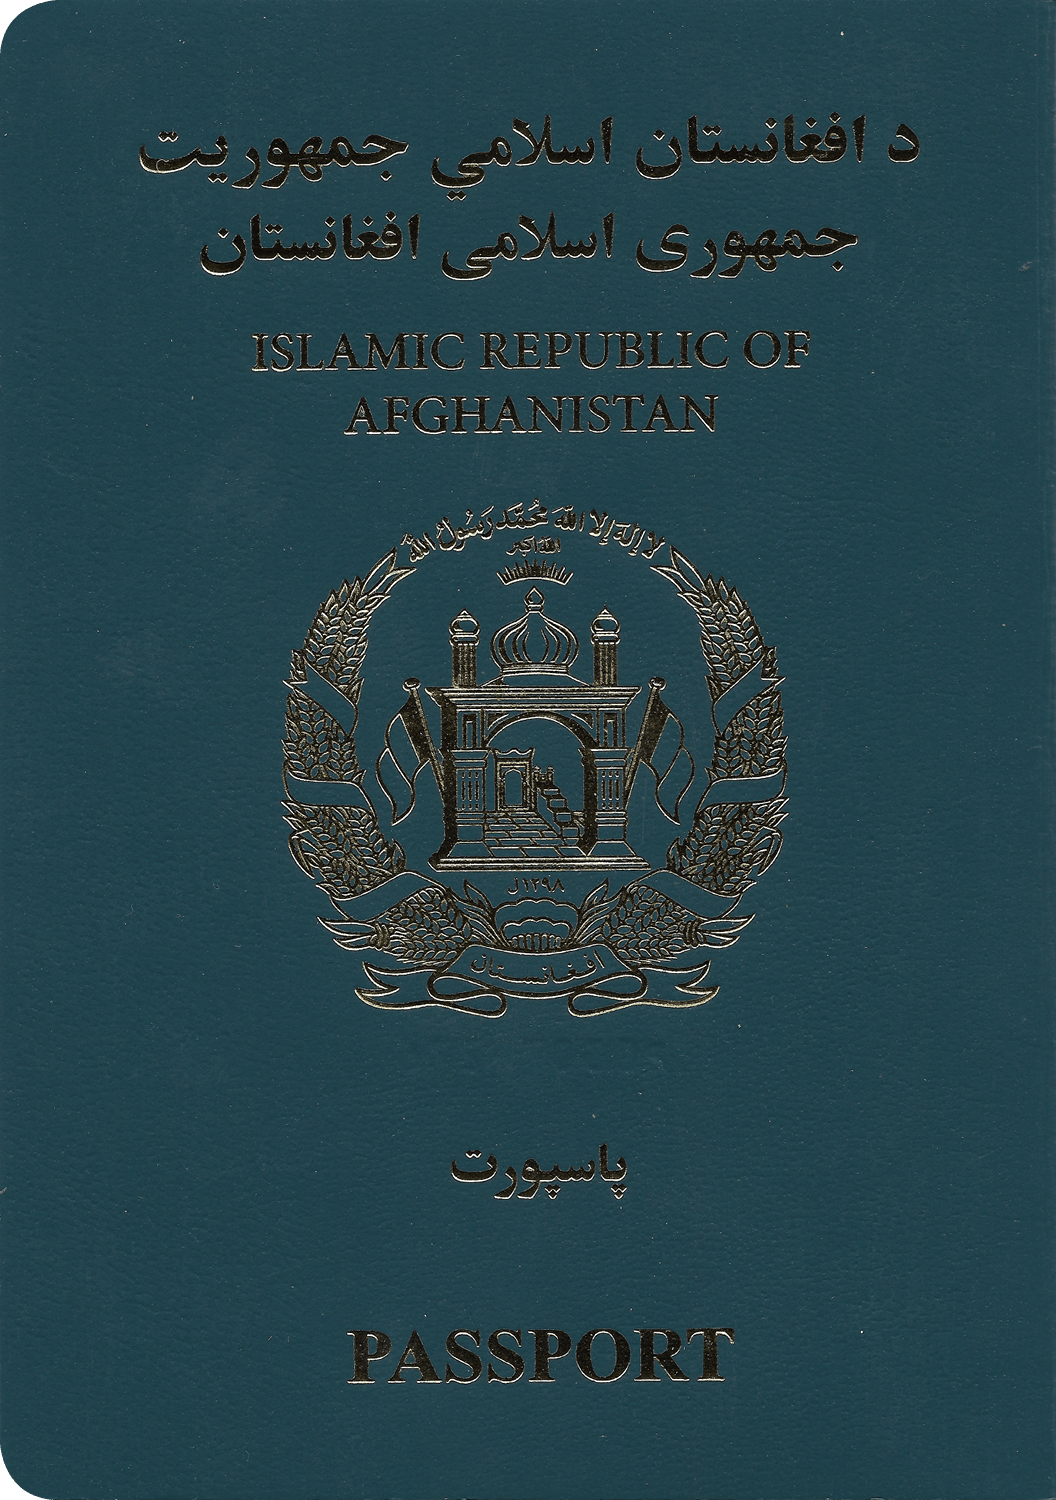 A regular or ordinary Afghan passport - Front side